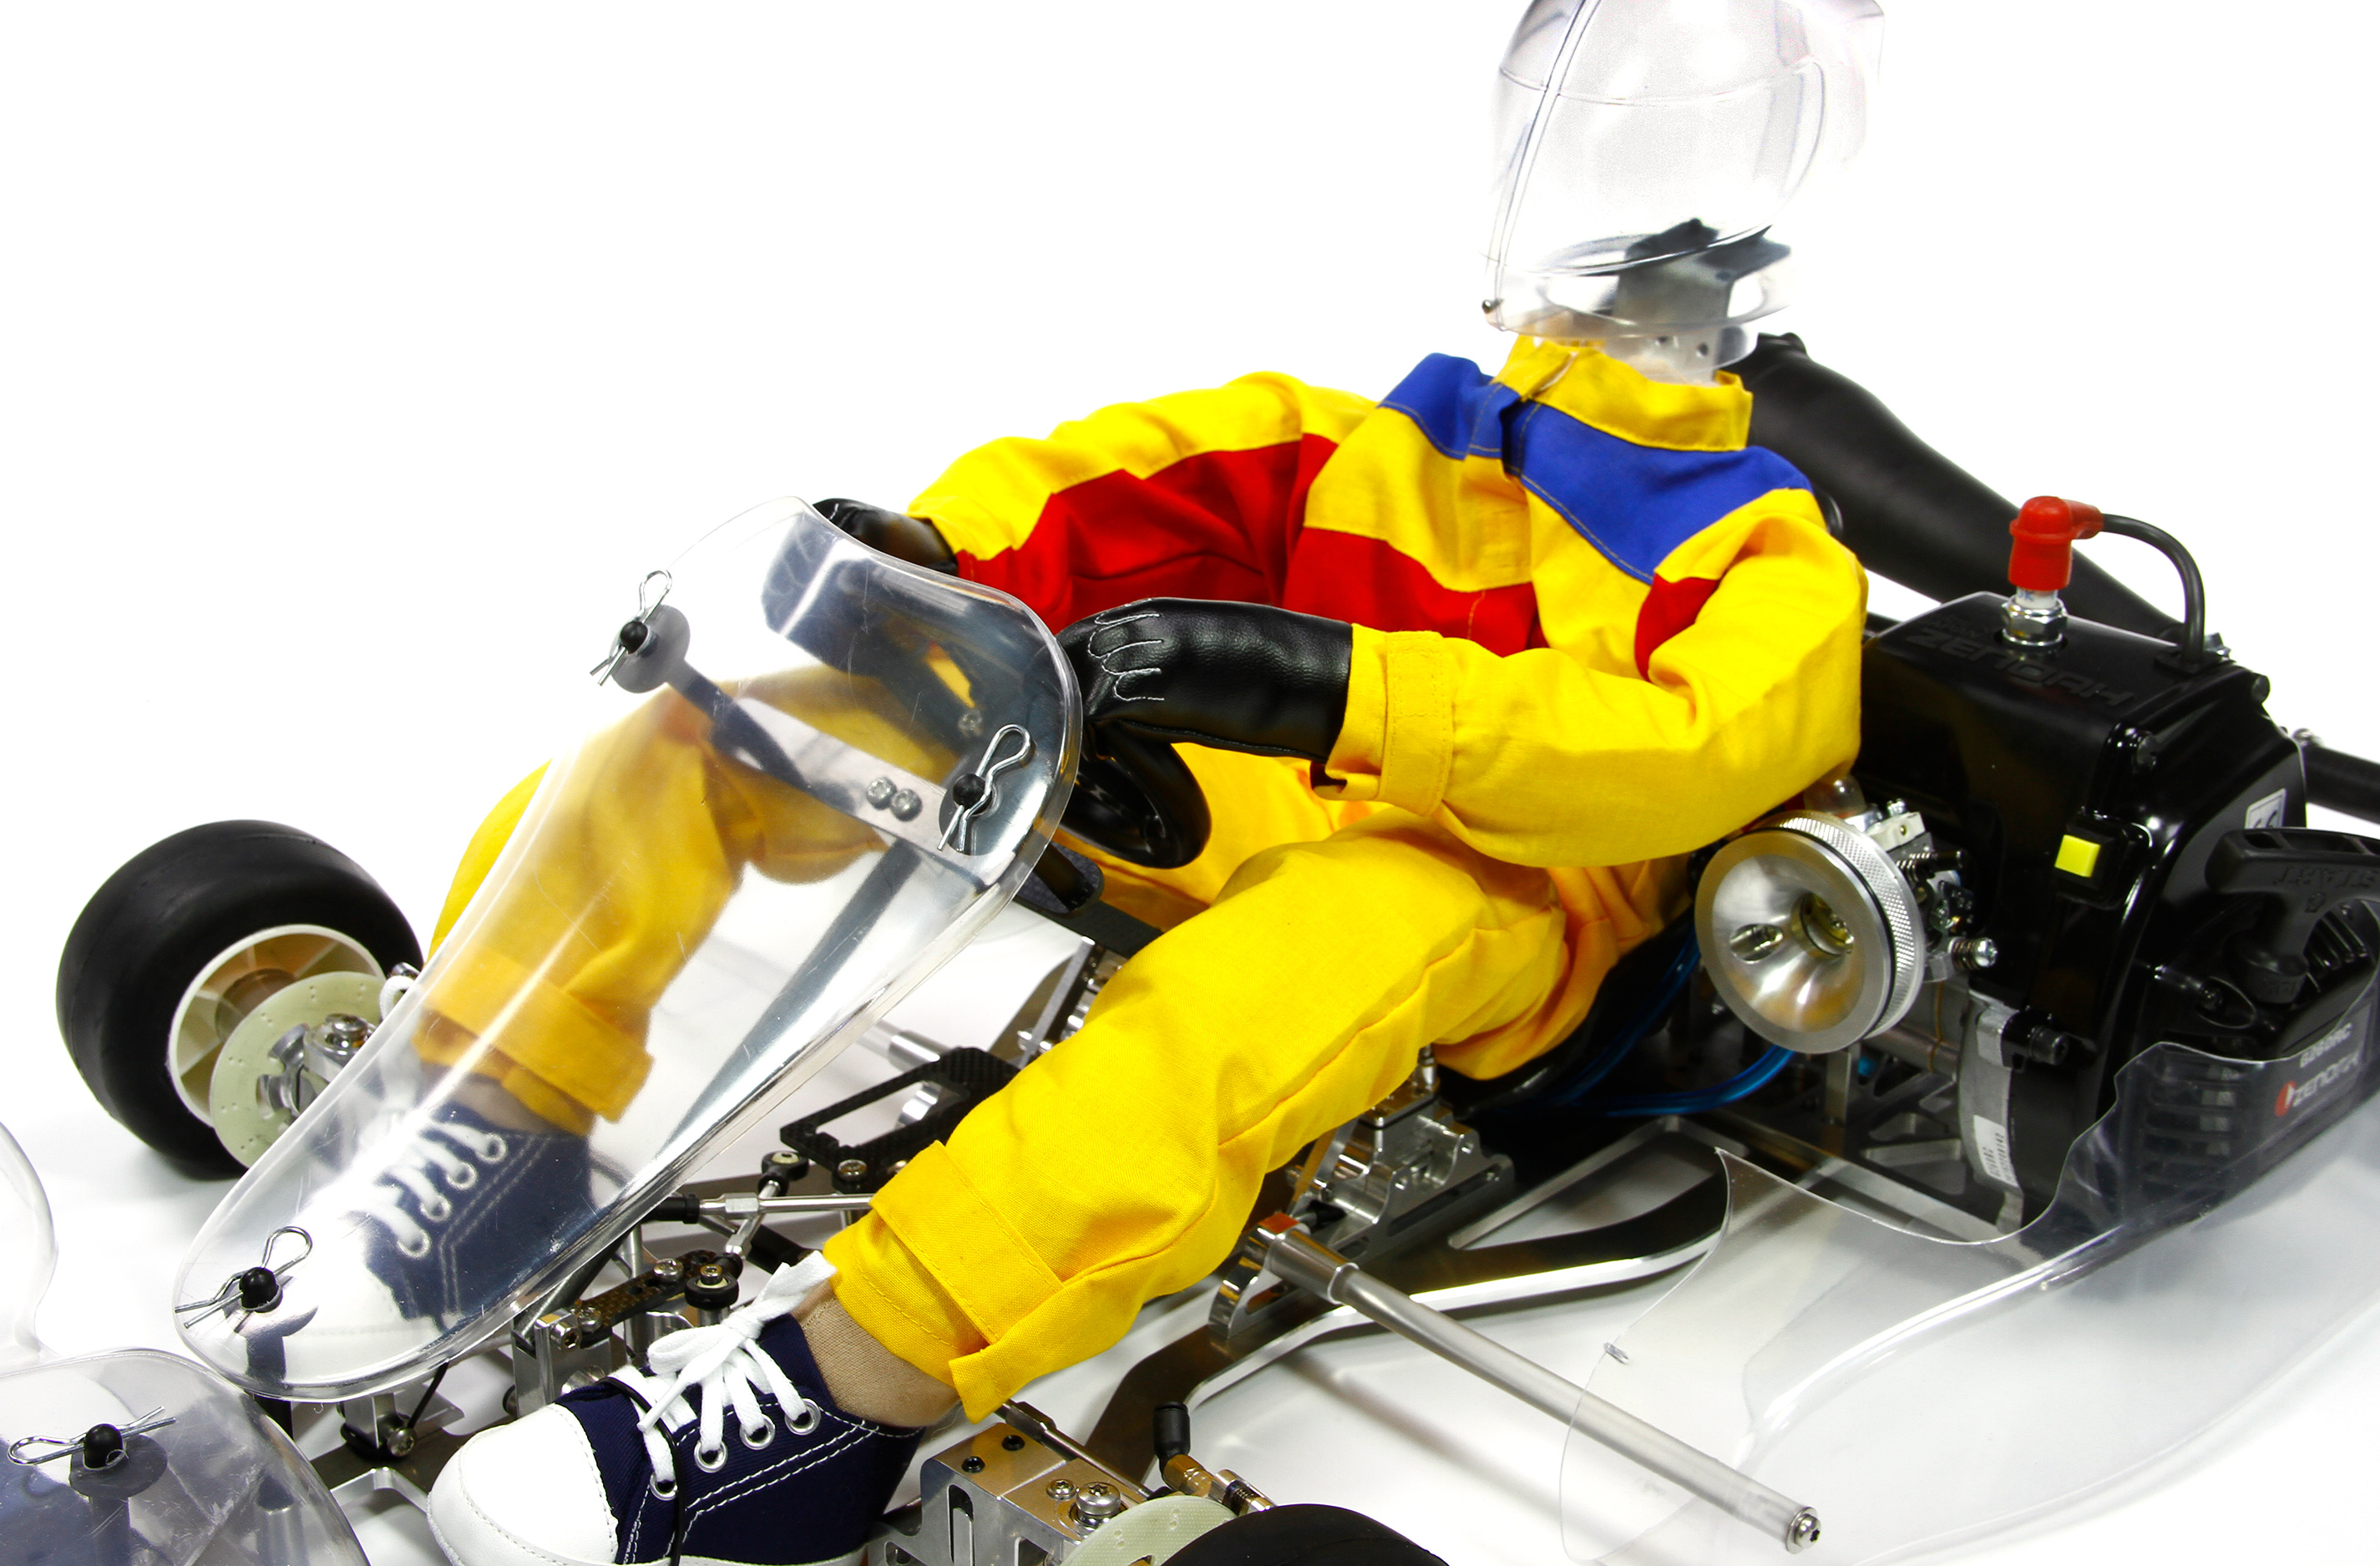 y1496 Overall for driver figure for H.A.R.M kart RK-1, hand-crafted